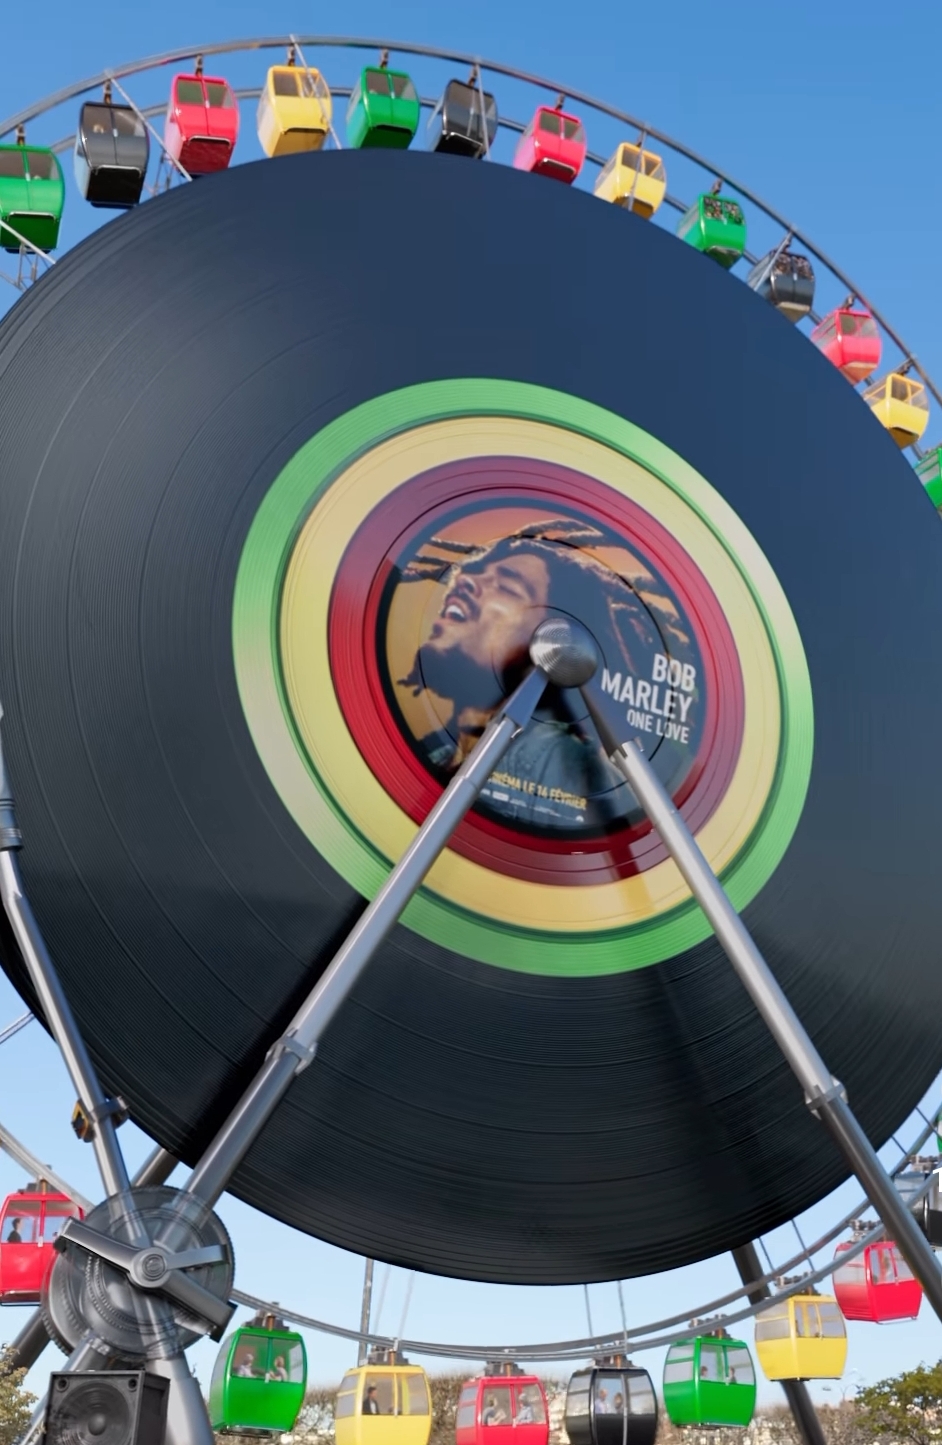 Confirmed Fake: Paris Unveils Bob Marley One Love Ferris Wheel Turned  Record Player - CaniDeals Retractions News